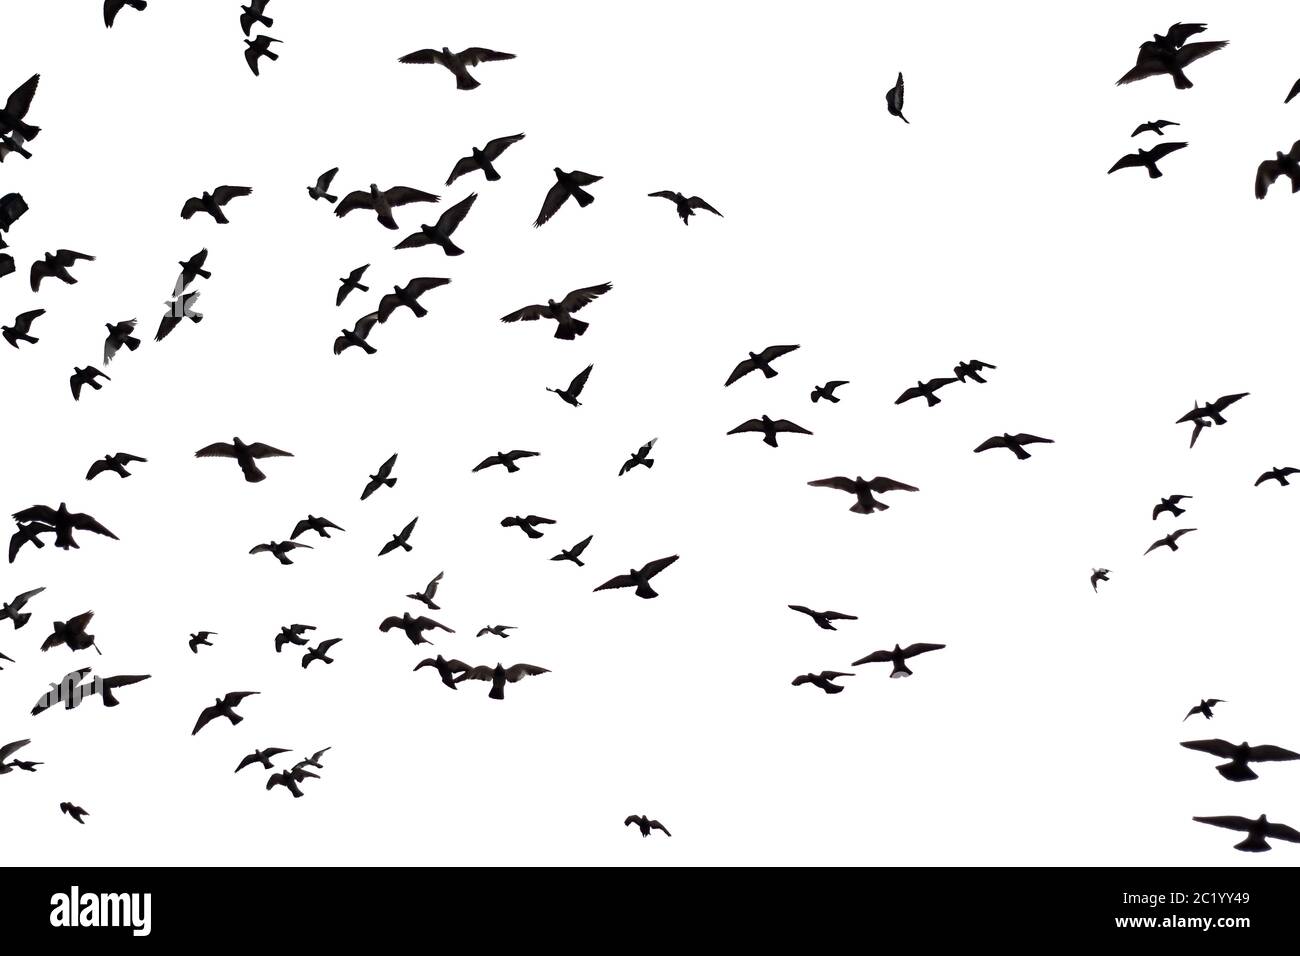 Silhouette of group flying pigeons isolated on white background. with clipping path. Stock Photo